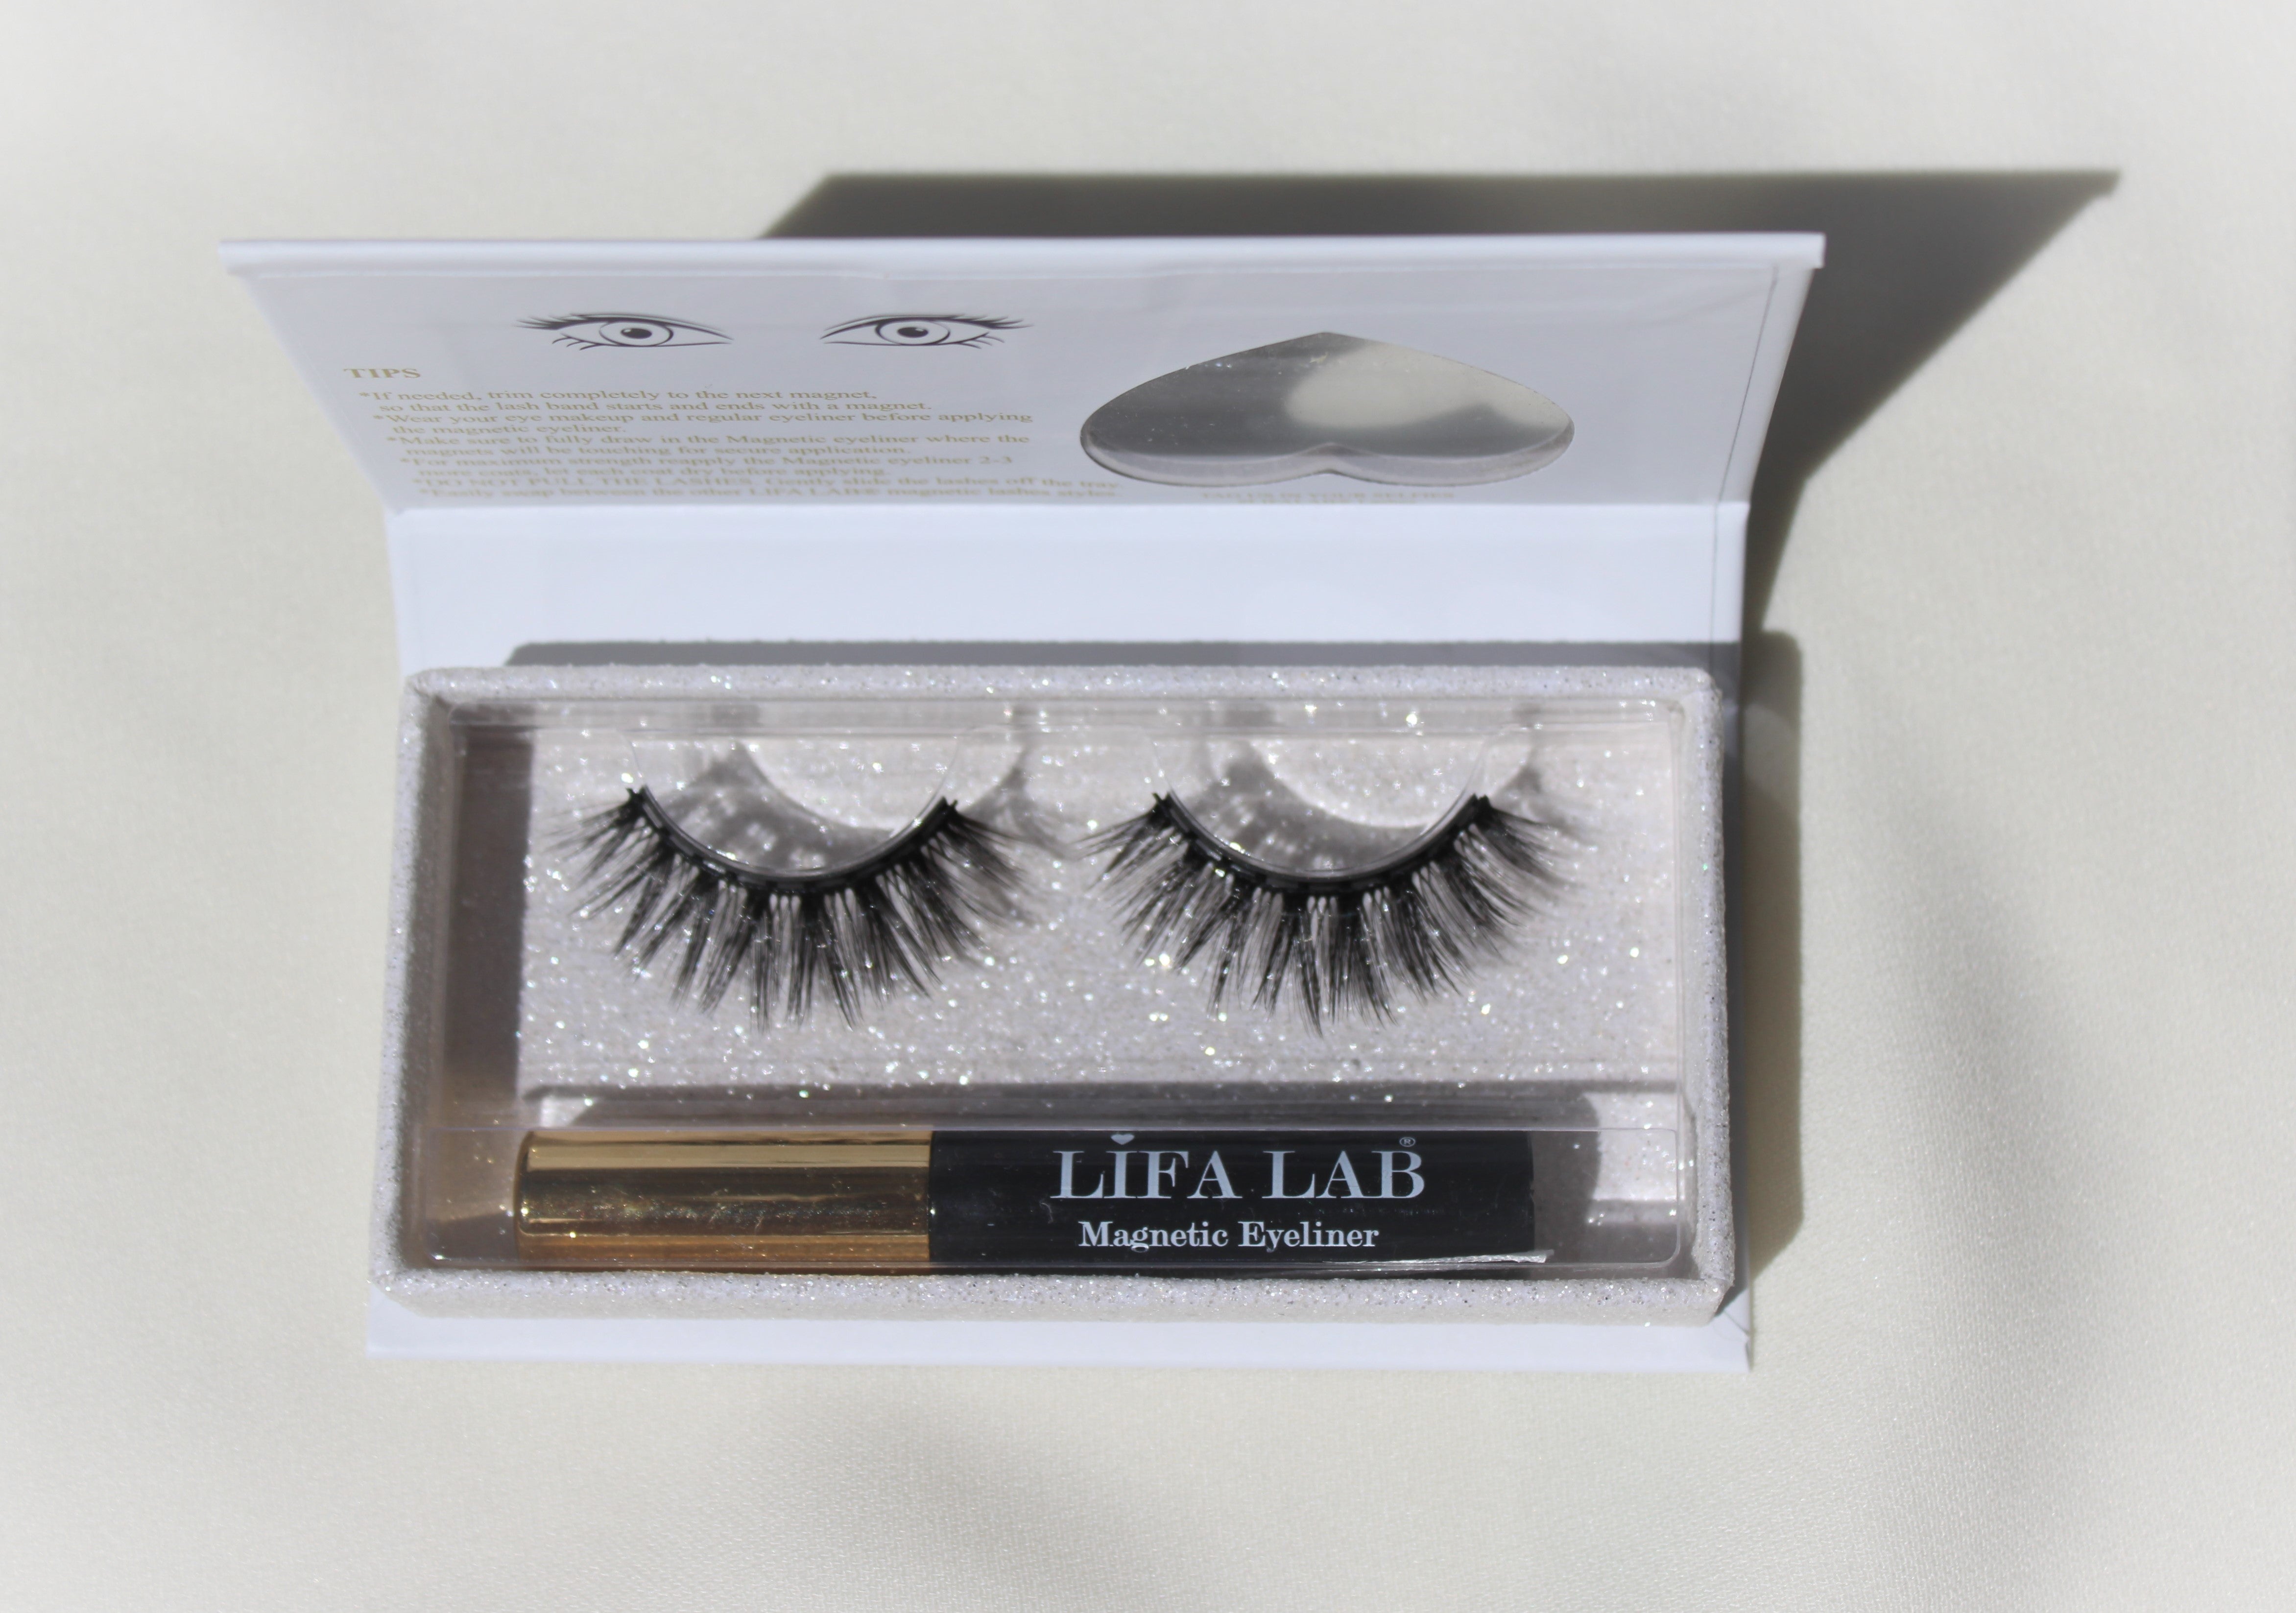 chic and magnificent Magnetic long salon eyelash from natural fibre with a magnetic black and gold eyeliner in a luxury box with a heart window on a white table cloth